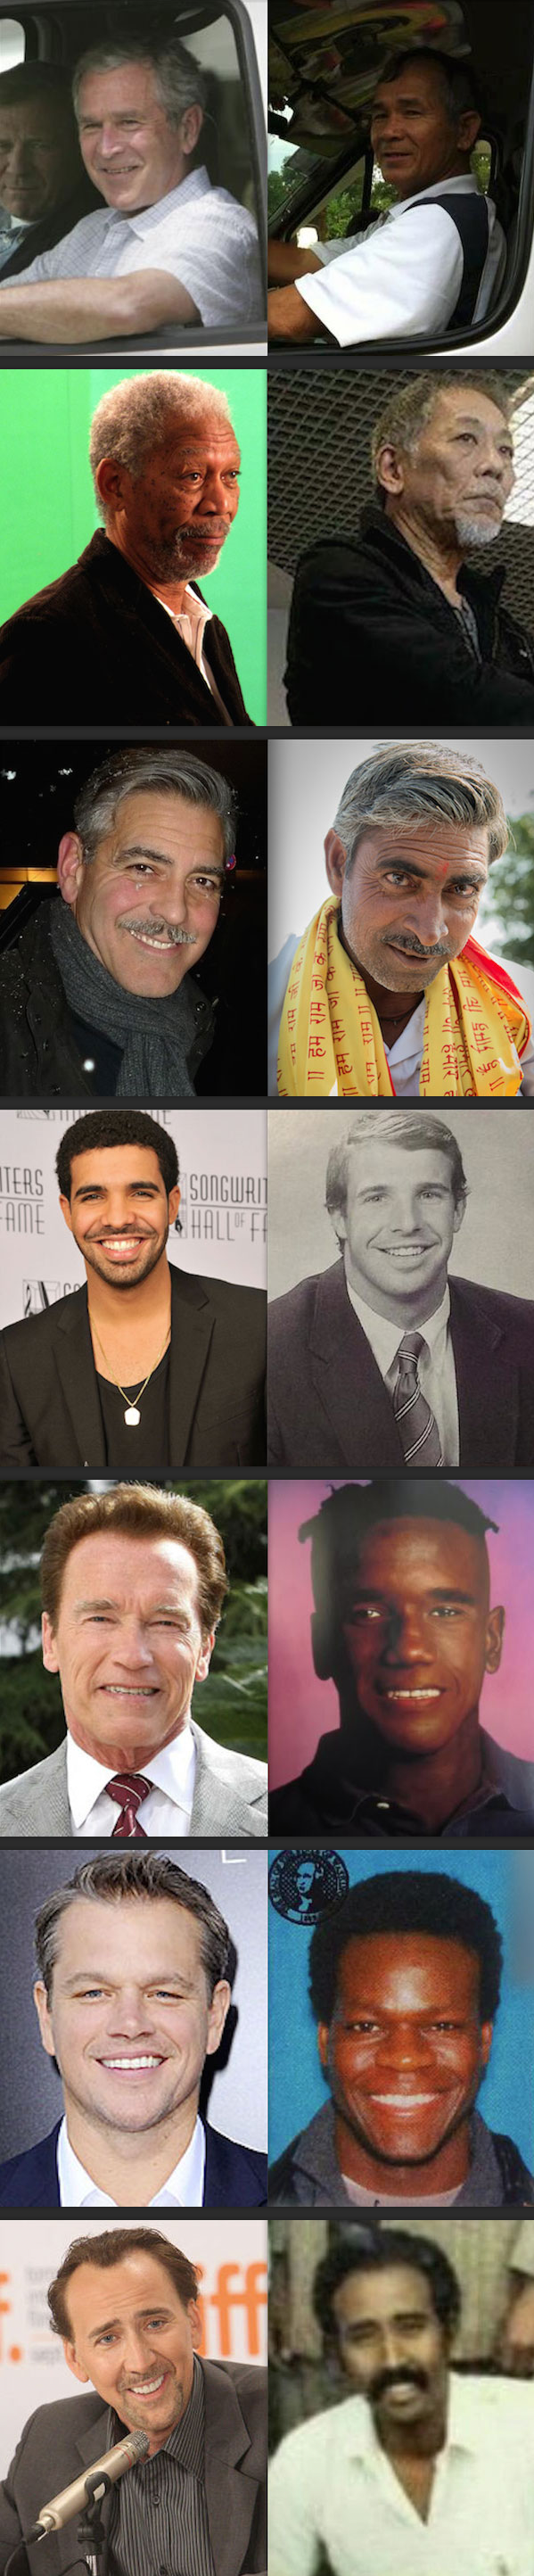 Celebrity+lookalikes+from+a+different+race